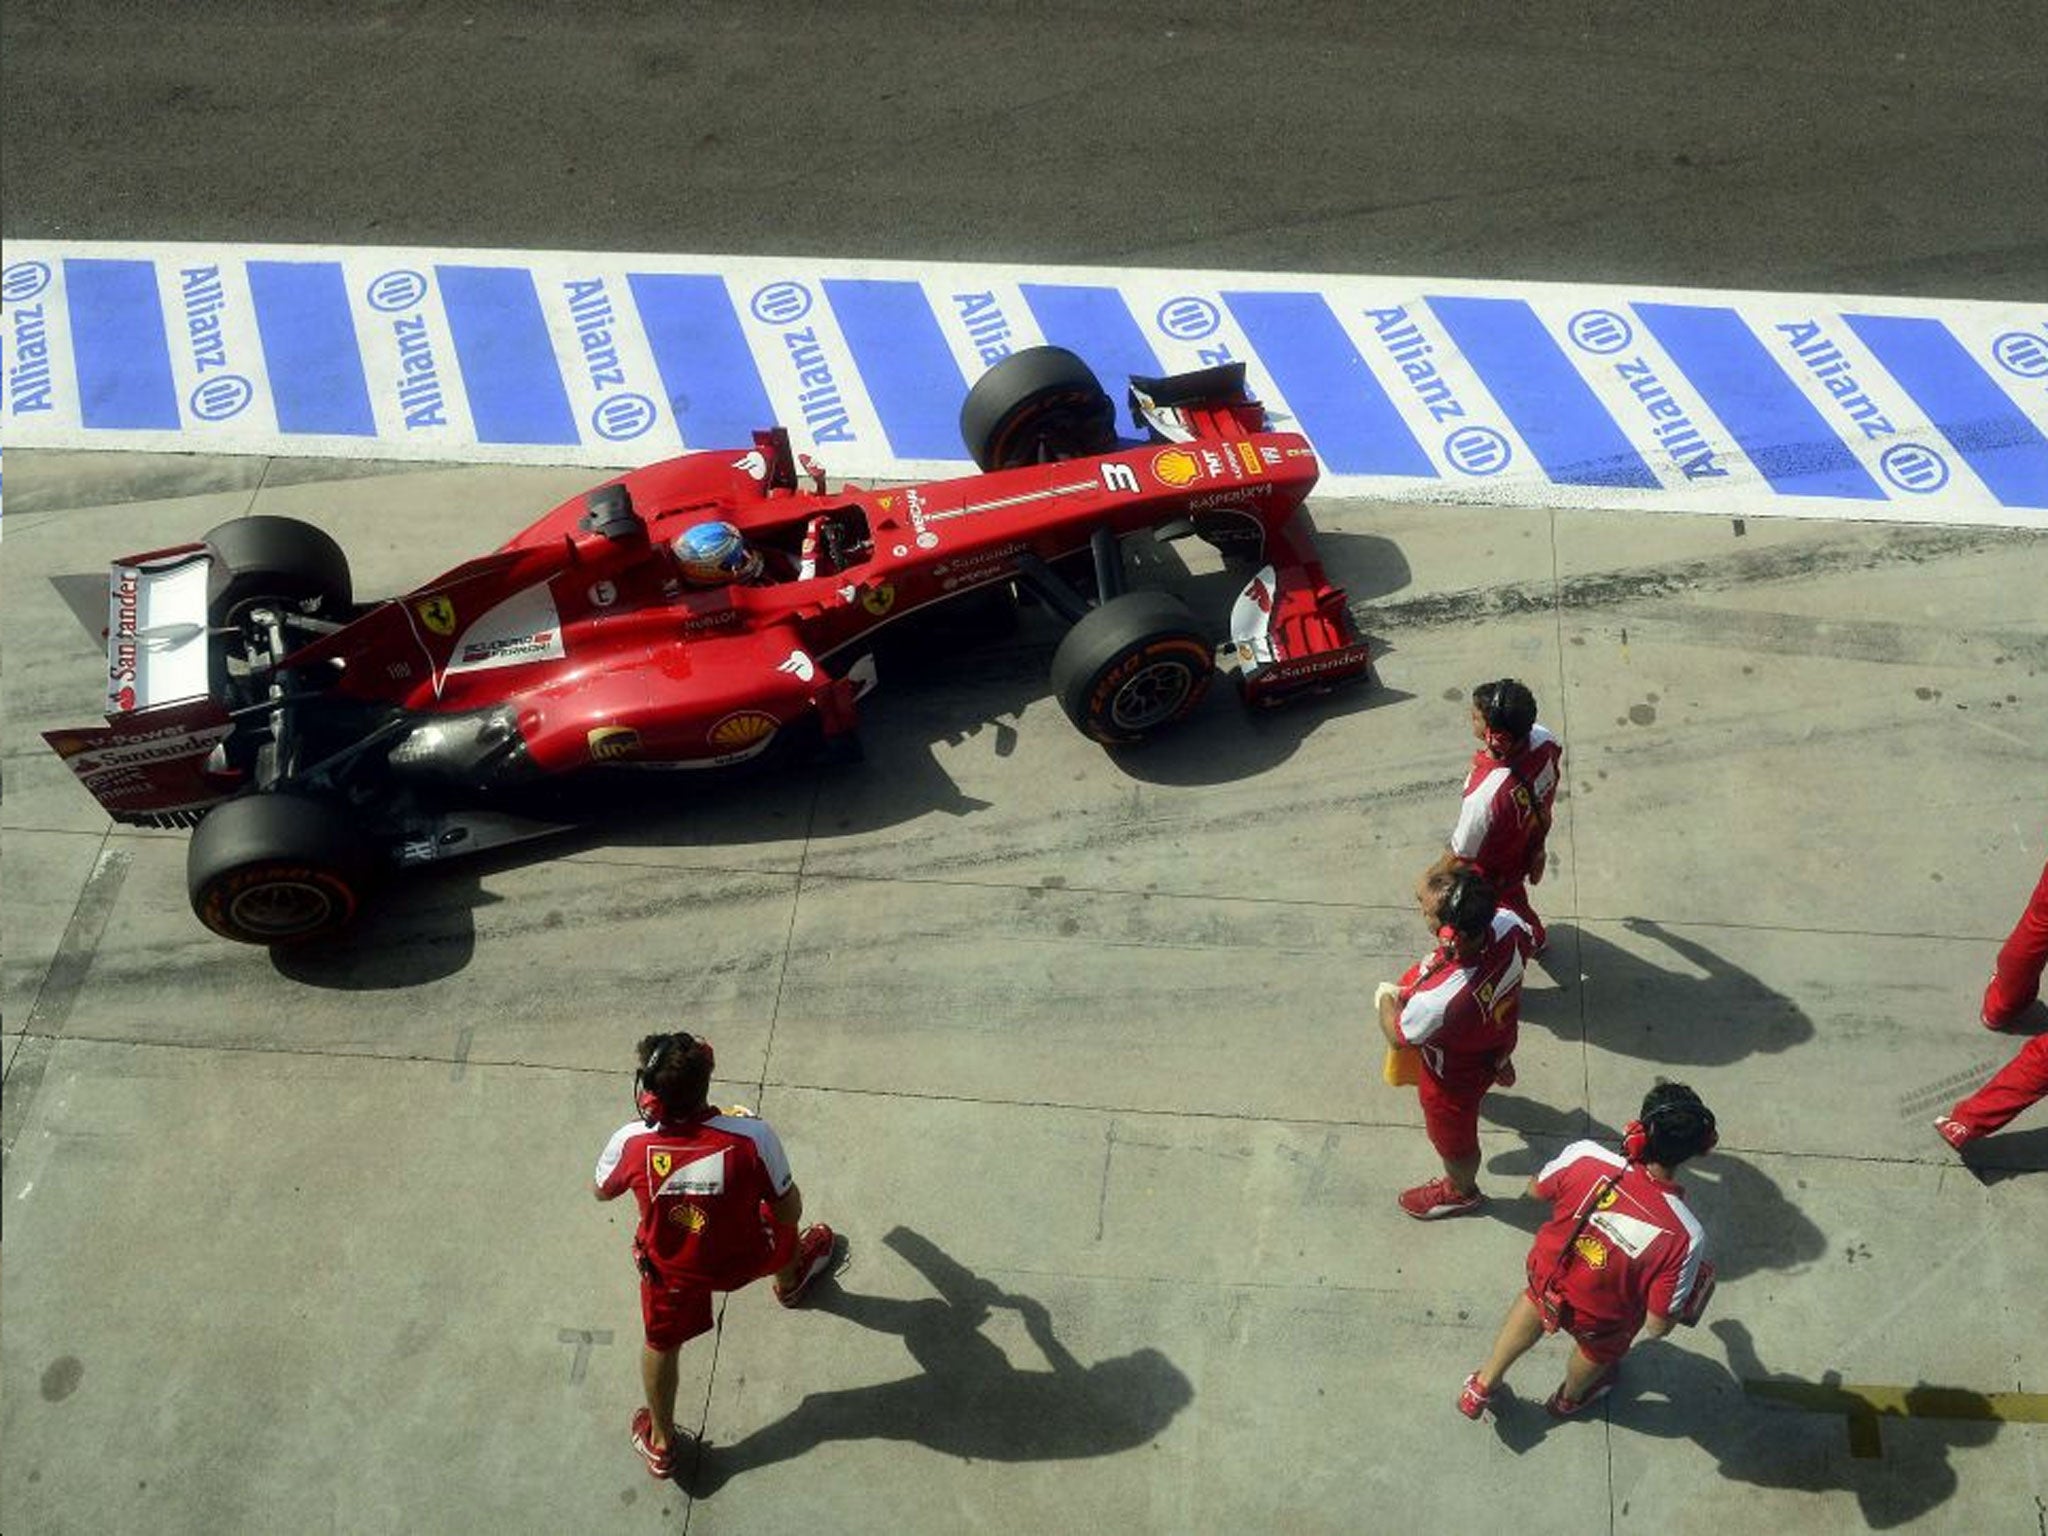 Stand-off: Fernando Alonso drives into the pits during his ill-fated qualifying session yesterday